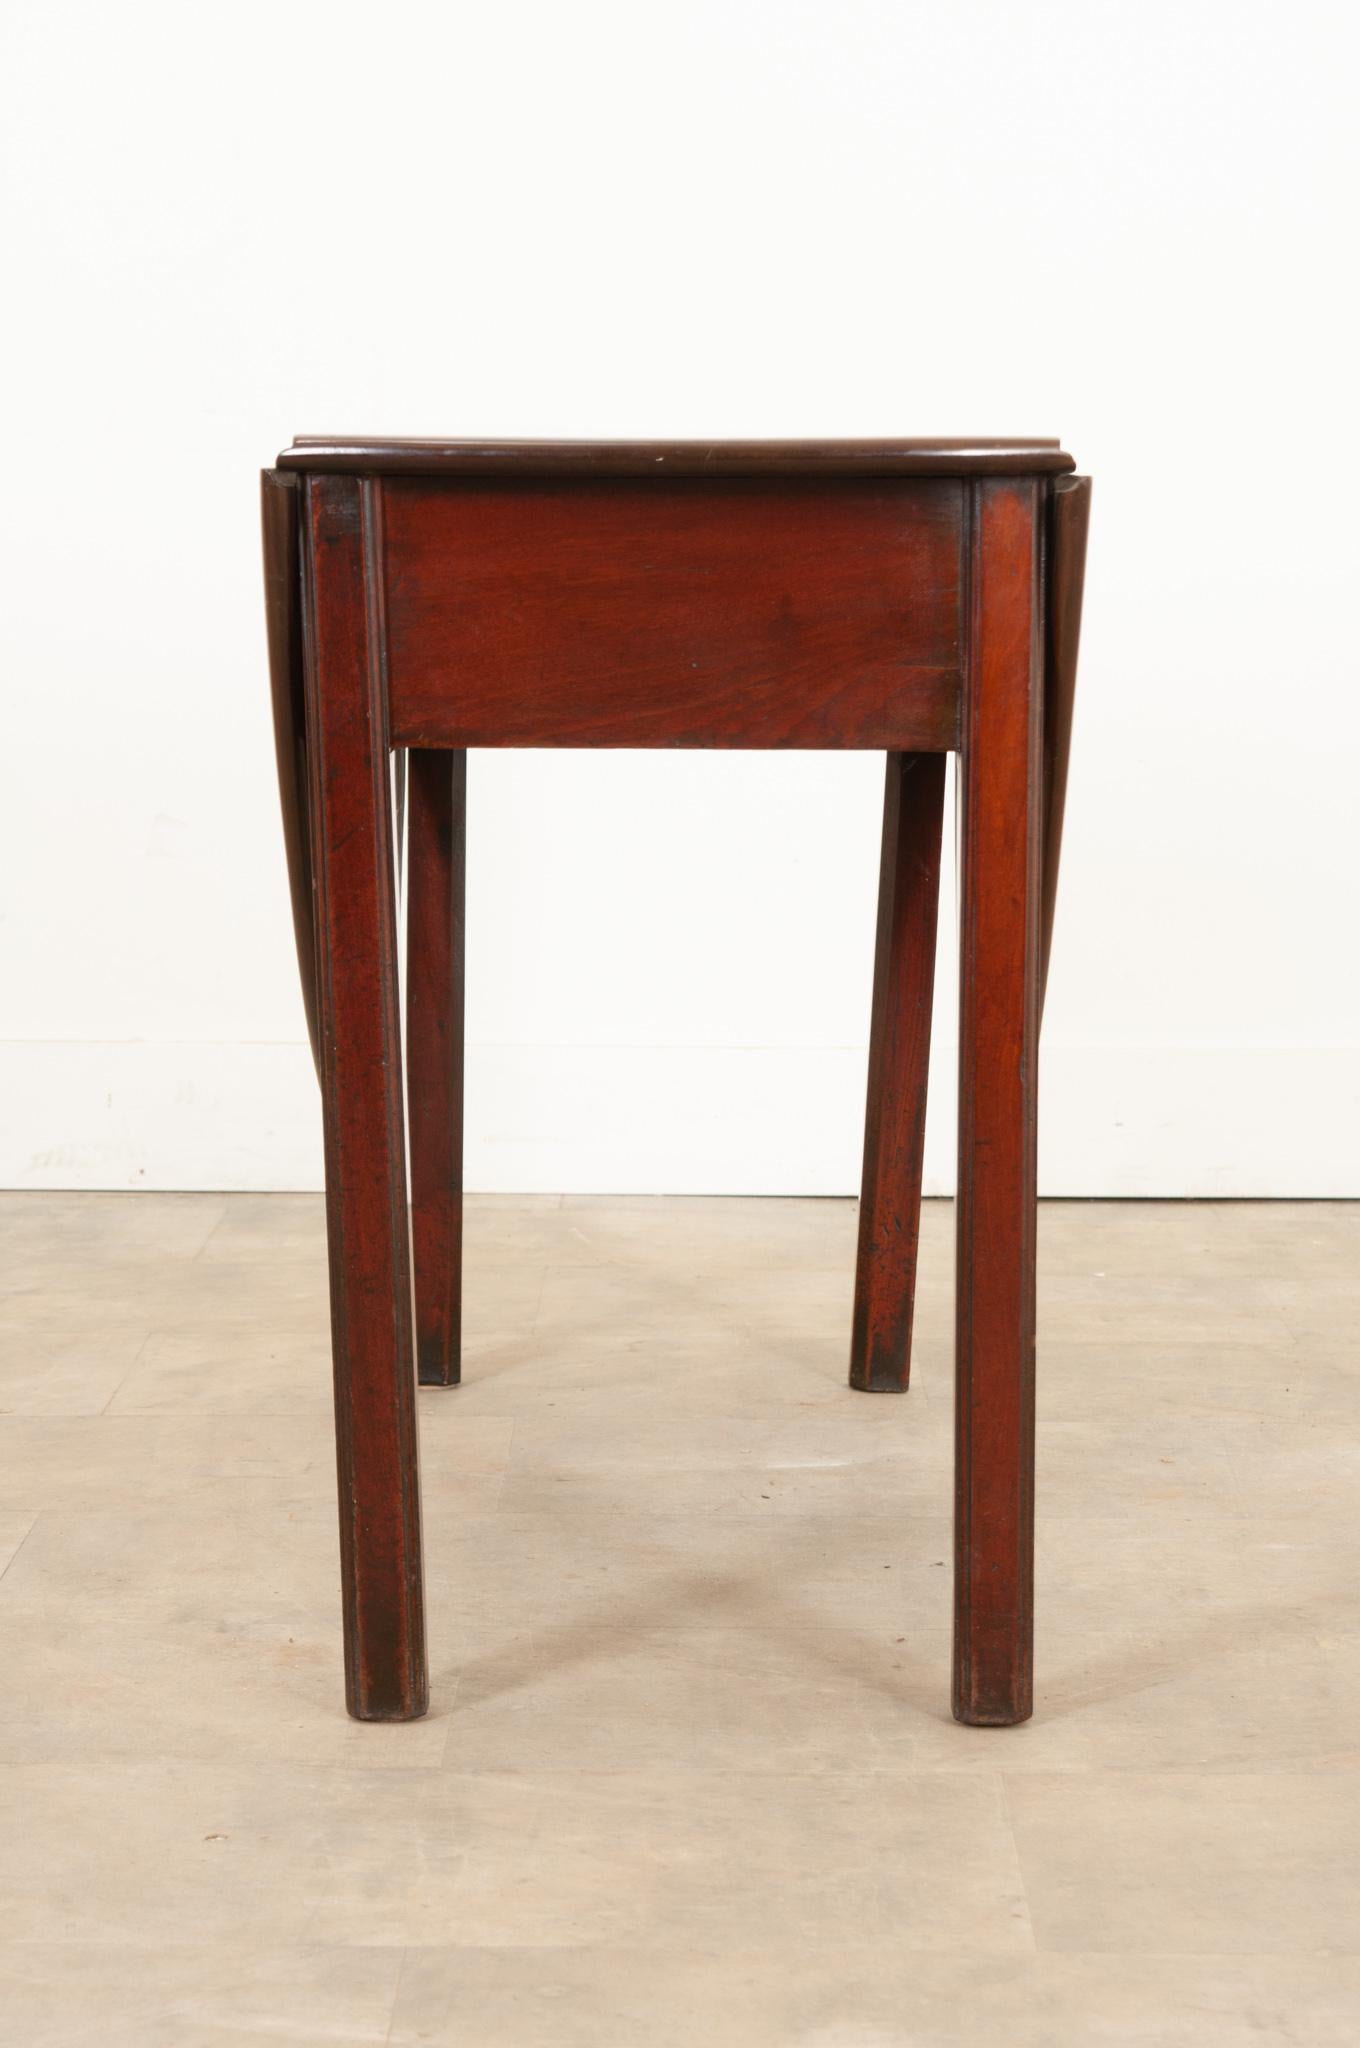 English 19th Century Mahogany Drop Leaf Table For Sale 3